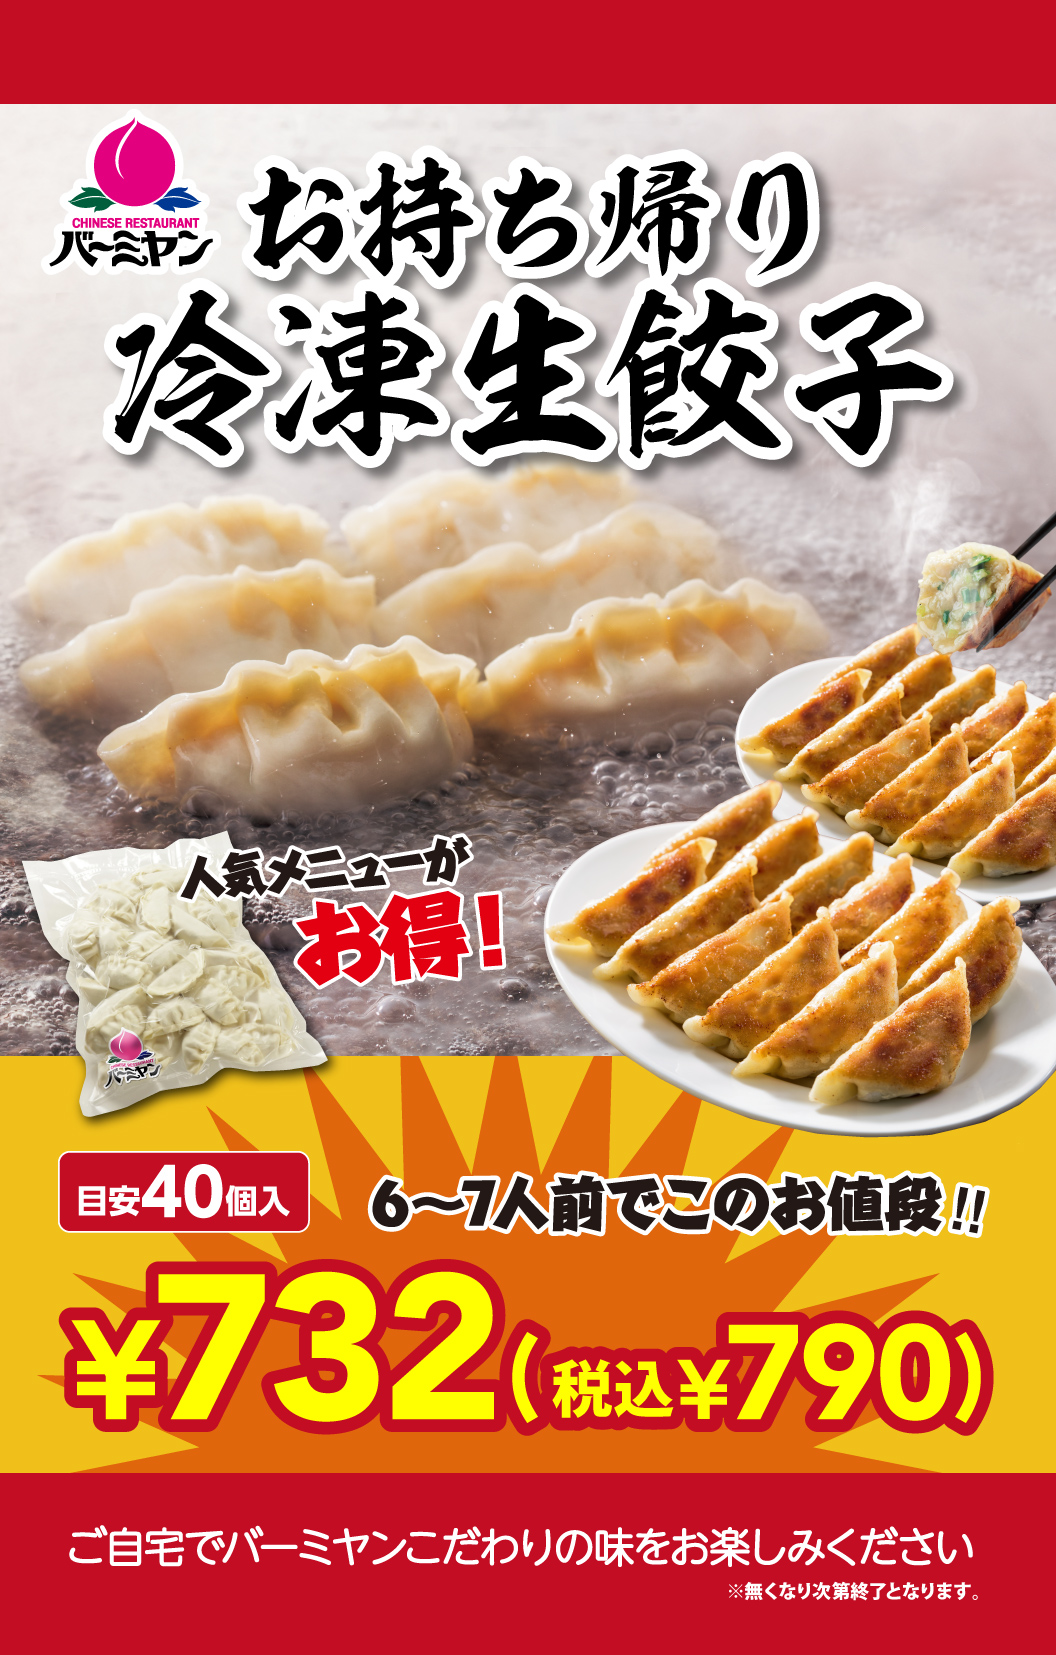 Bamiyan（バーミヤン）Takeaway Frozen Fresh Gyoza Popular menu items at great deals! Estimated 40 pieces, 6 to 7 servings at this price! ! ¥732 (¥790 including tax)